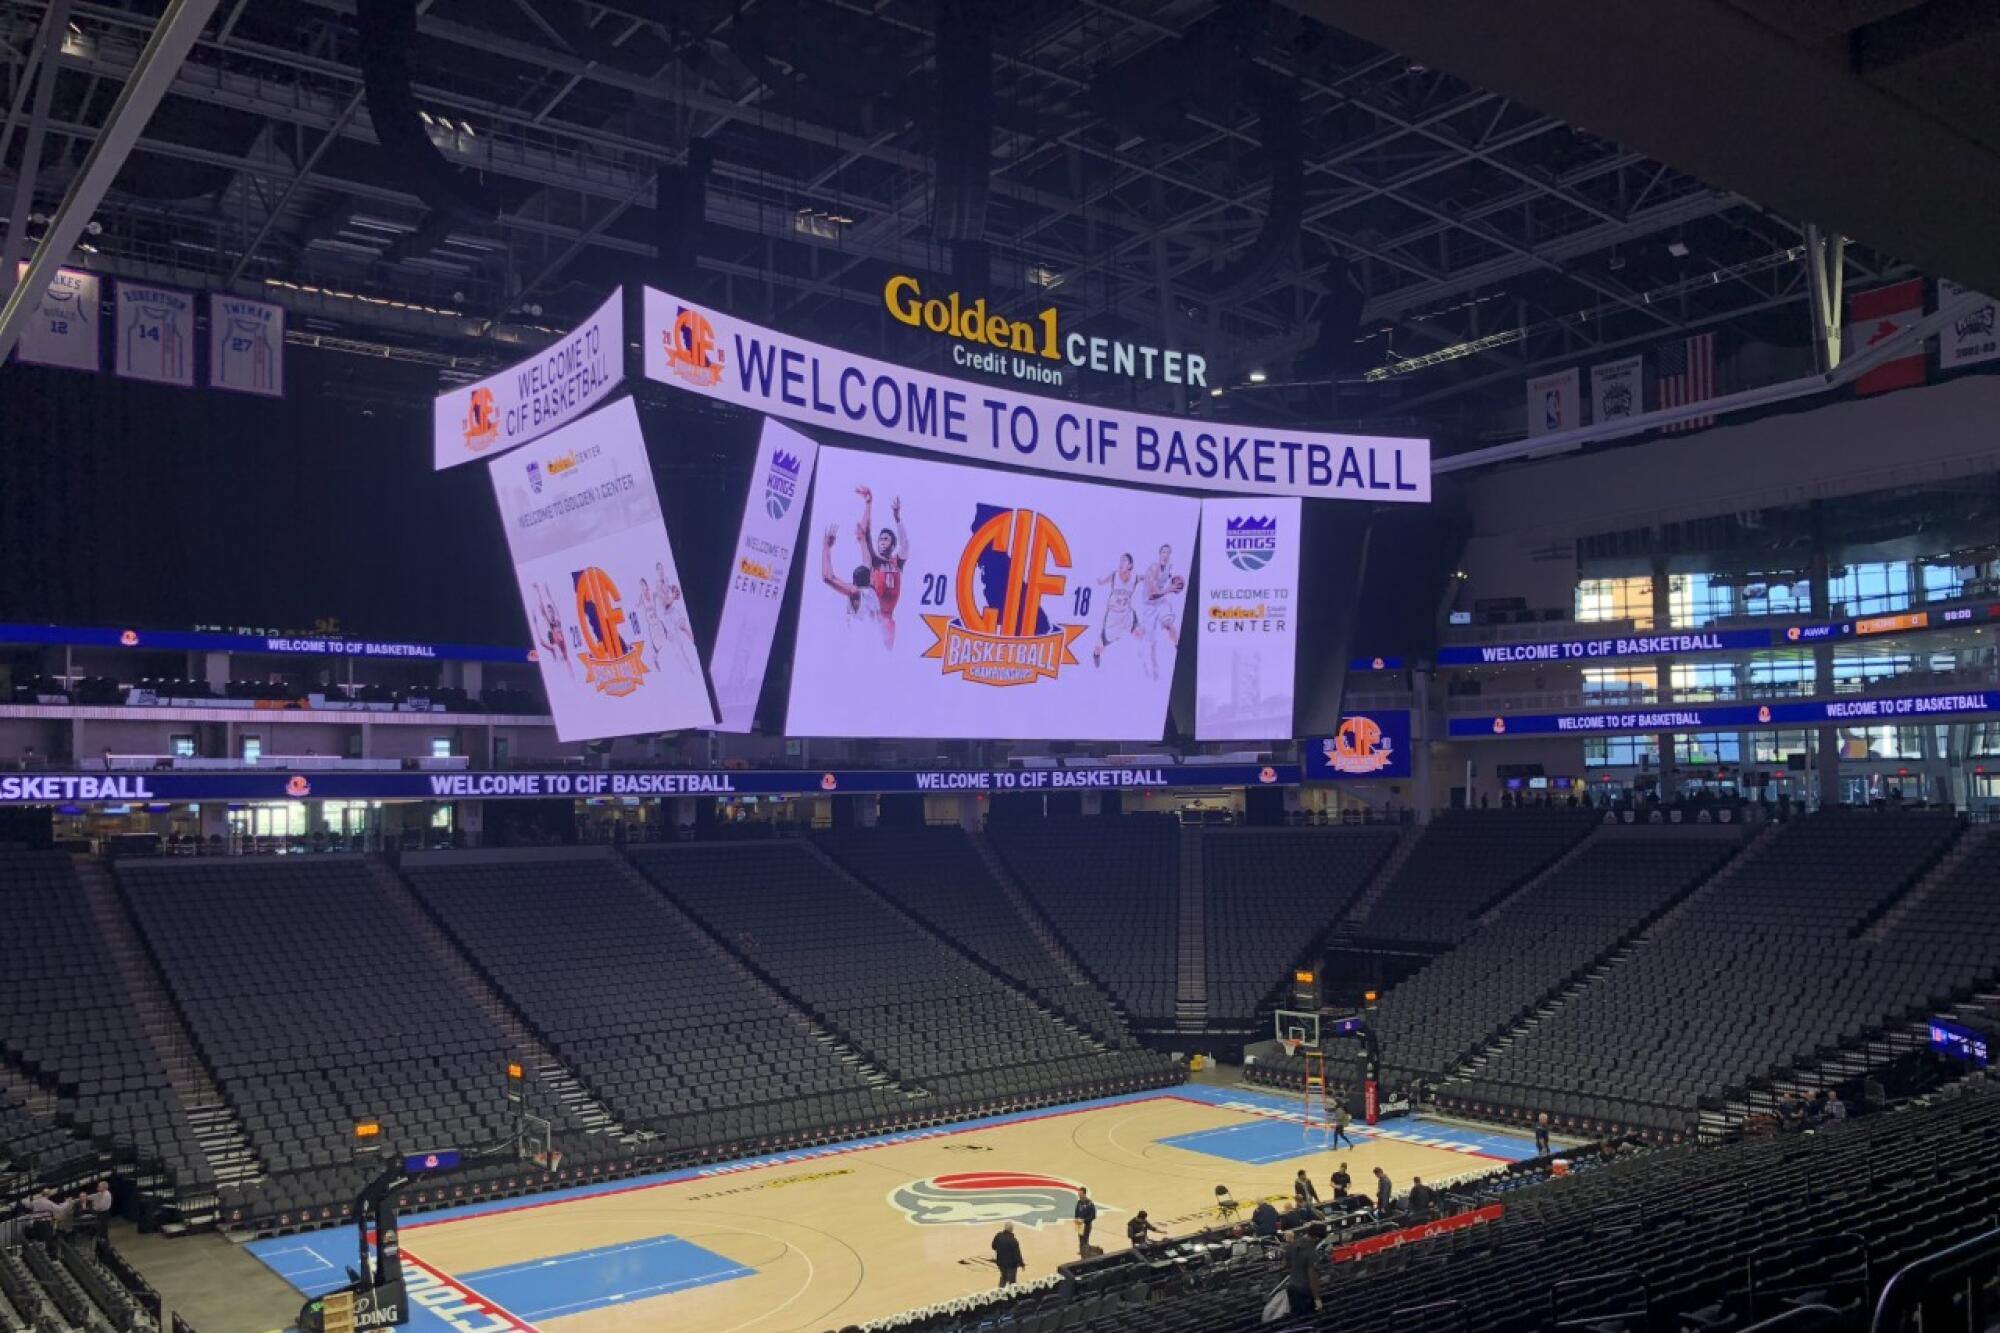 A mostly empty Golden 1 Center in Sacramento with the electronic billboard reading "Welcome to CIF Basketball"